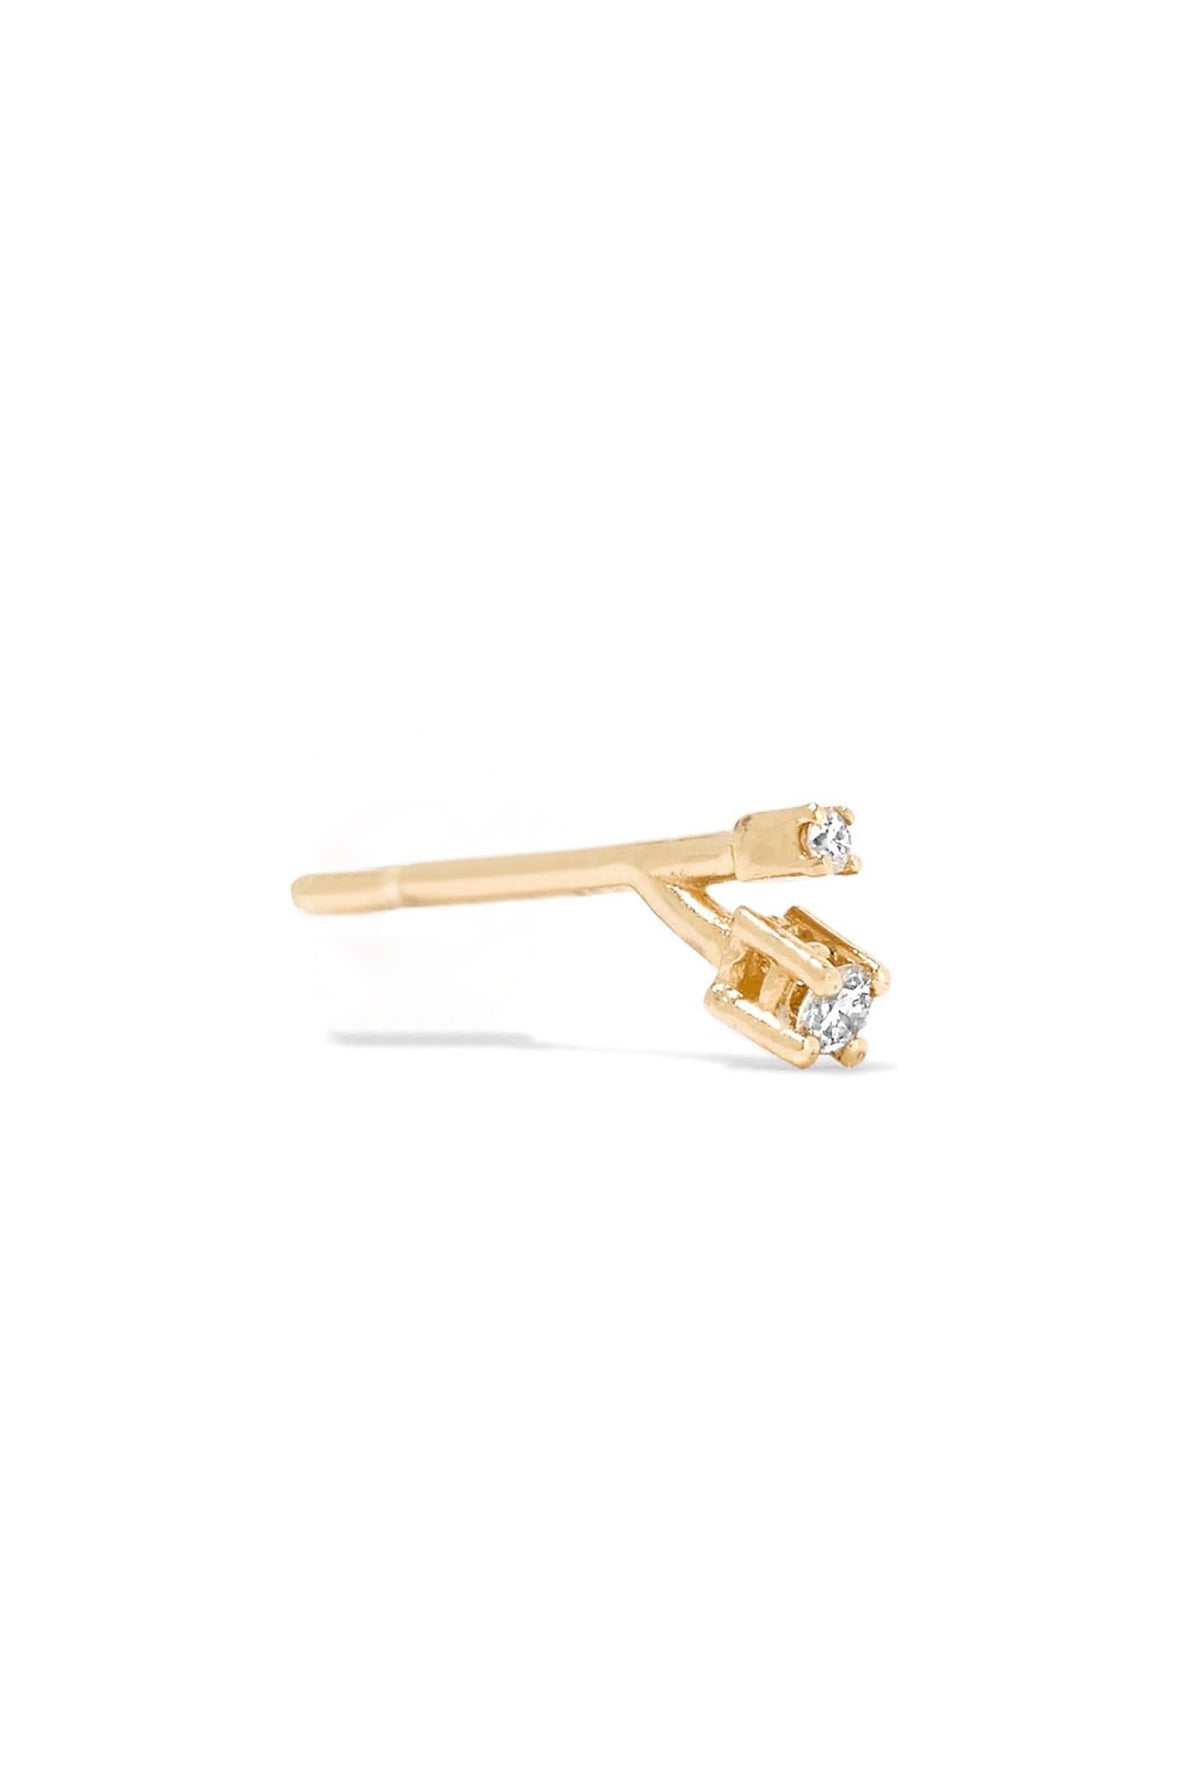 Big Spark yellow gold earring